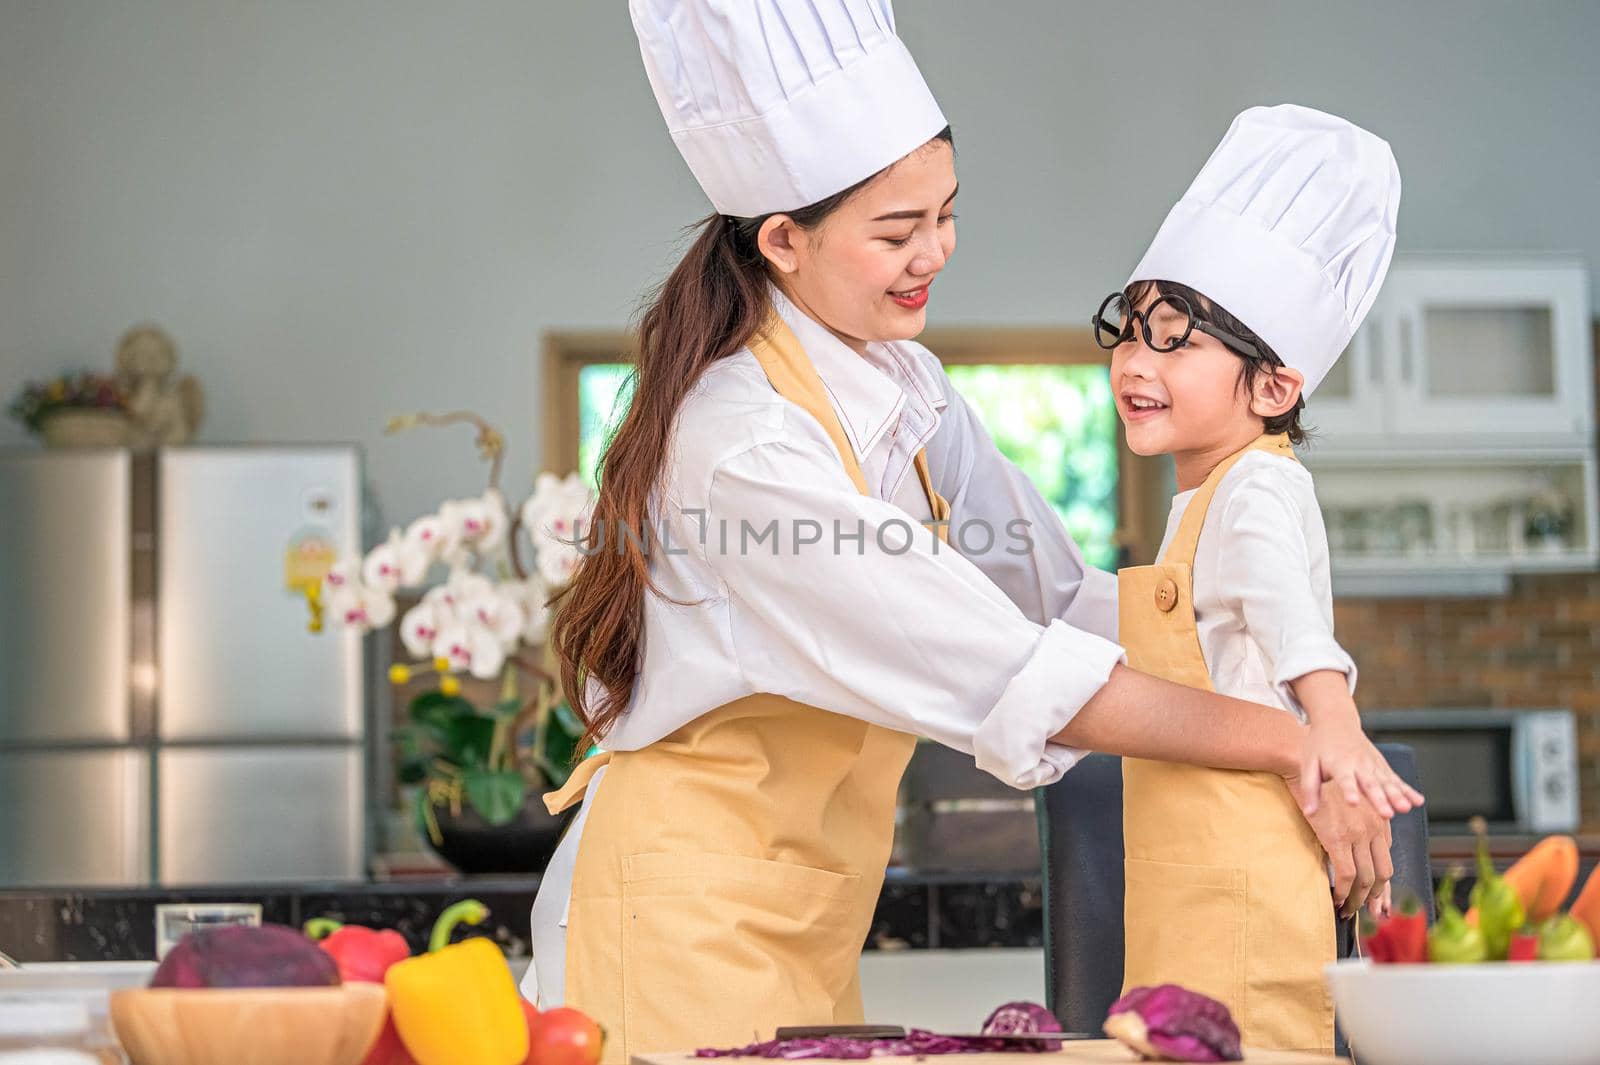 Happy beautiful Asian woman dress up cute little boy chef outfit for prepare to cooking in home kitchen. People lifestyles and Family. Homemade food and ingredients concept. Two Thai people life